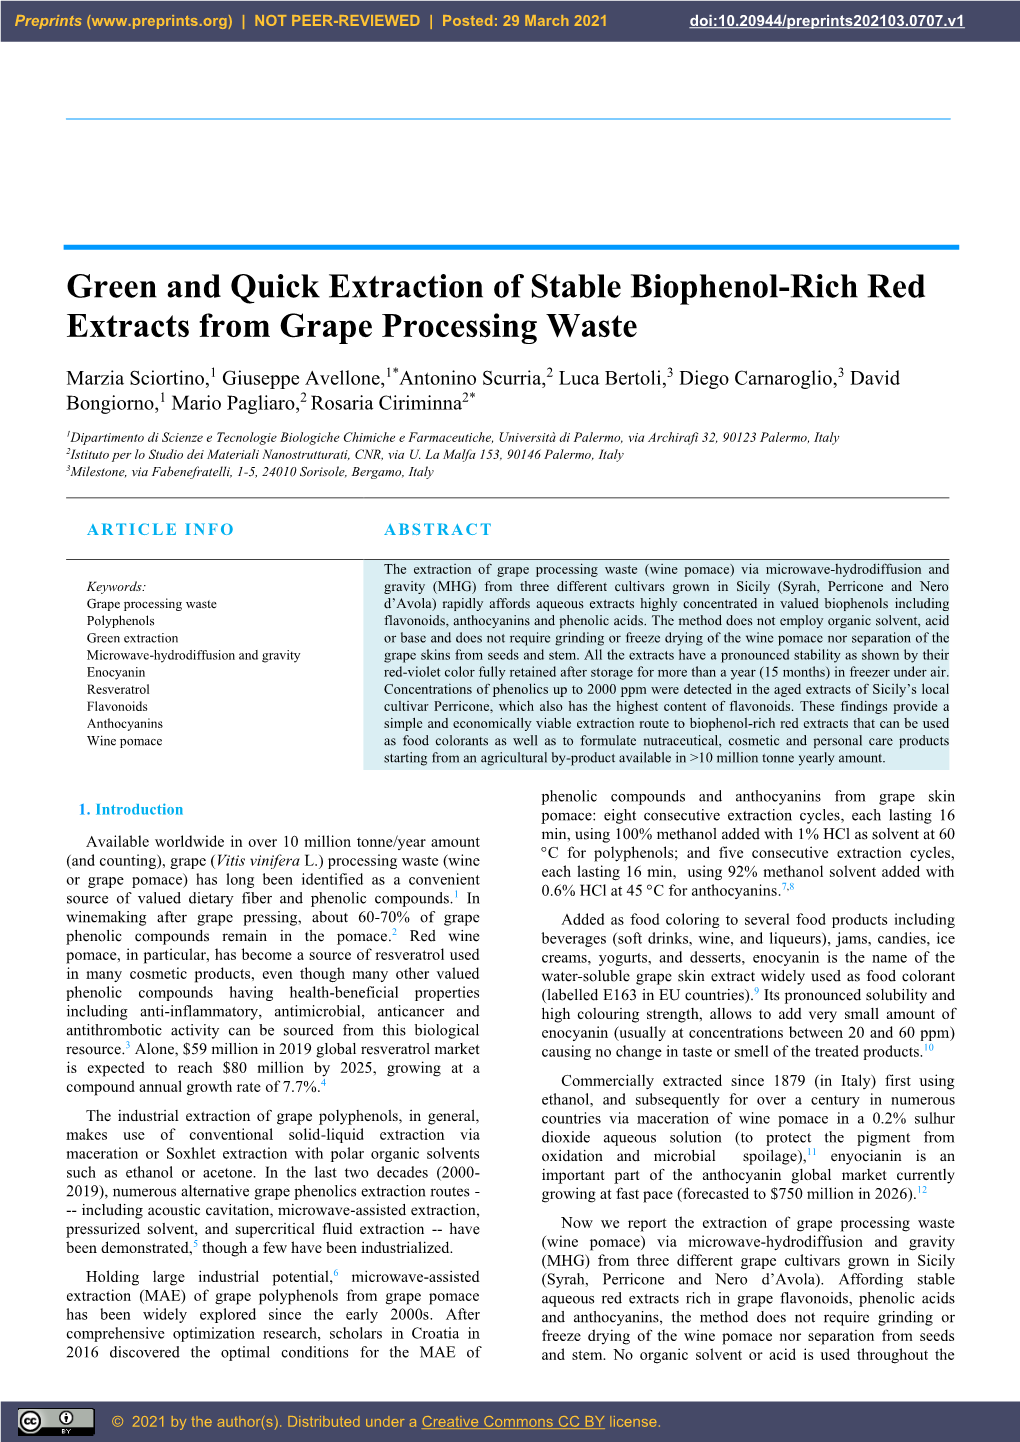 Green and Quick Extraction of Stable Biophenol-Rich Red Extracts from Grape Processing Waste